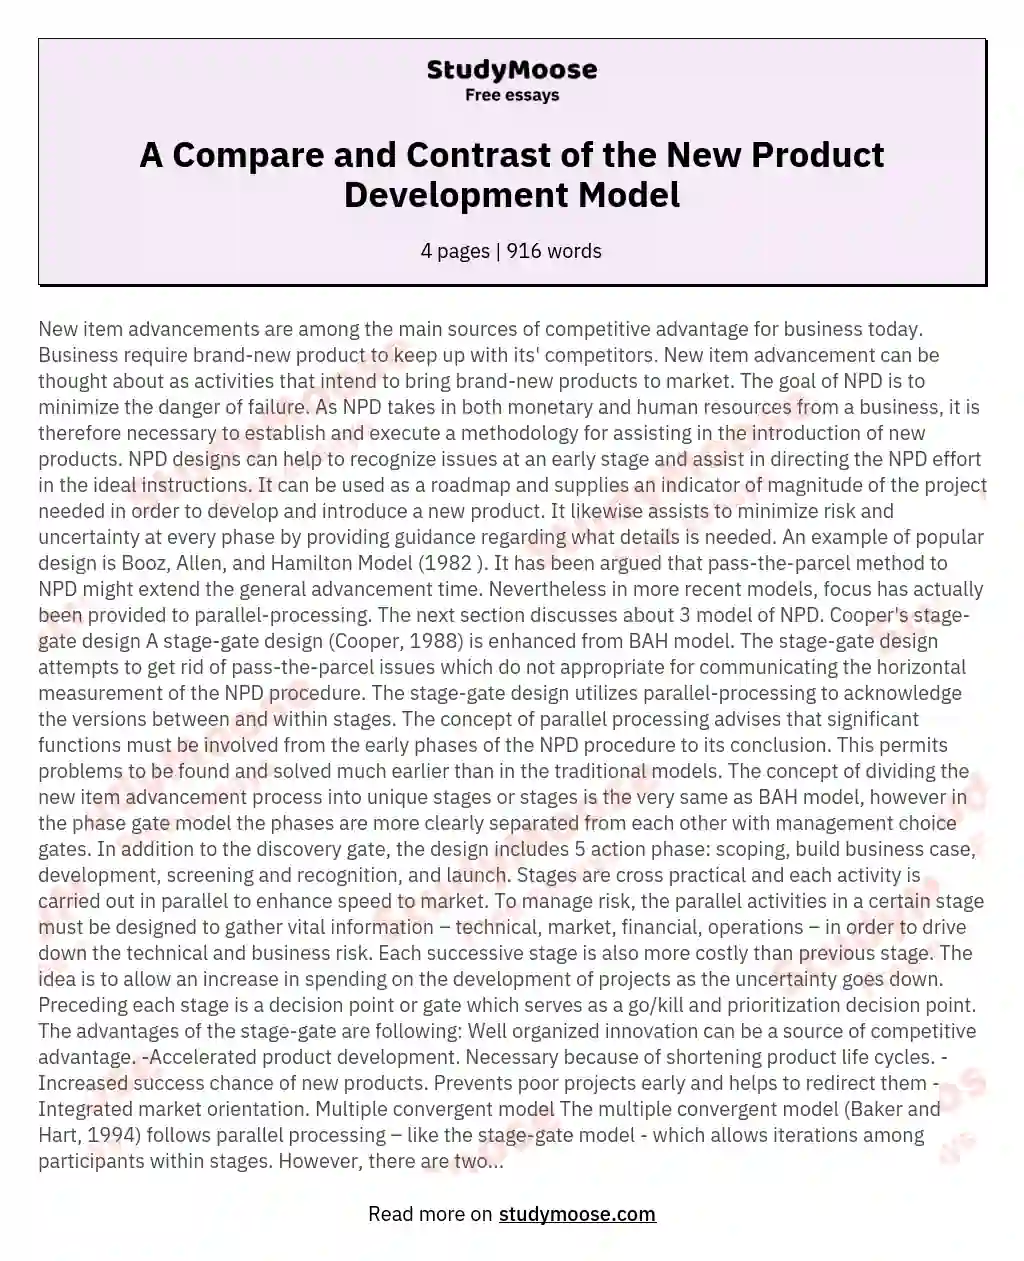 A Compare and Contrast of the New Product Development Model essay